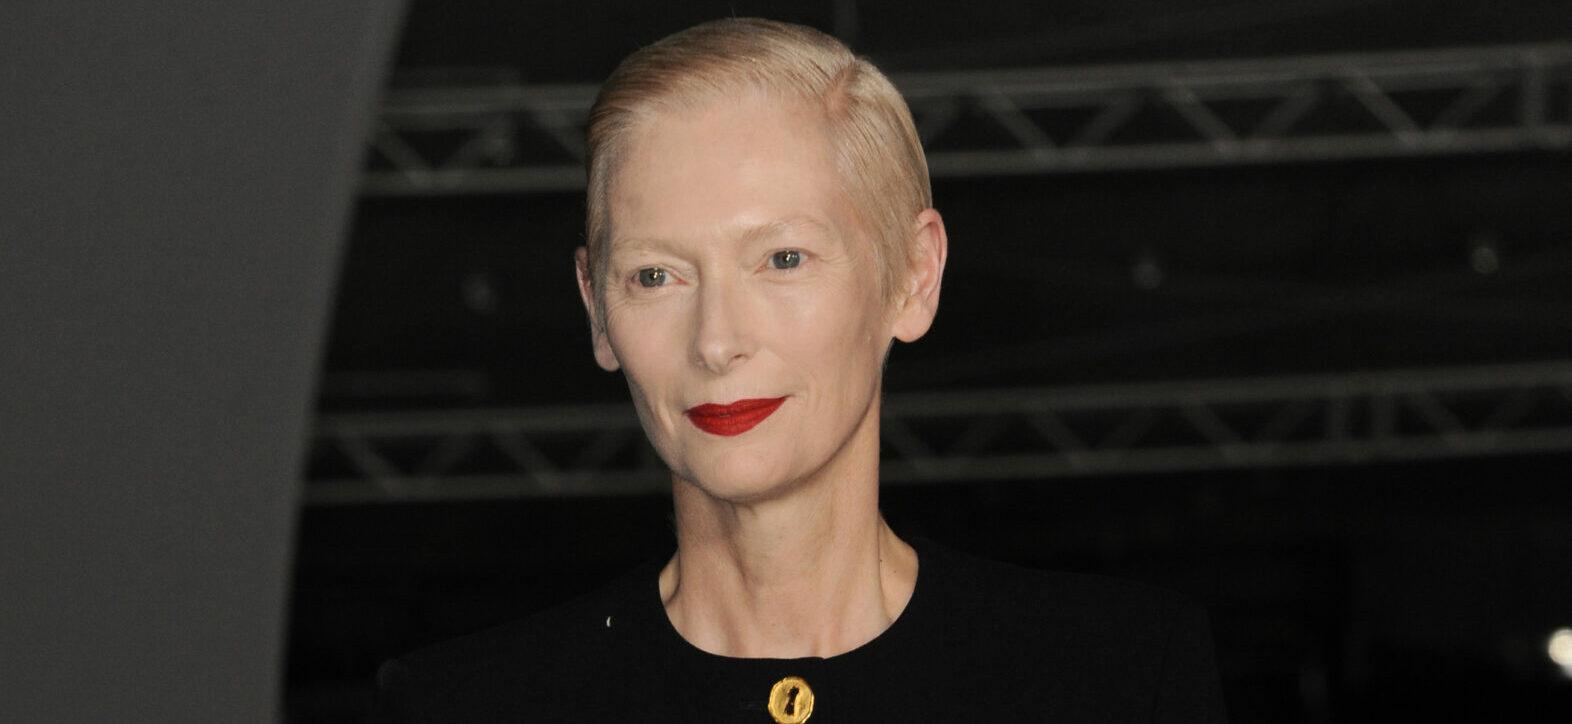 Tilda Swinton No Longer Interested in Observing COVID-19 Protocols On Movie Sets: 'I Have Faith'